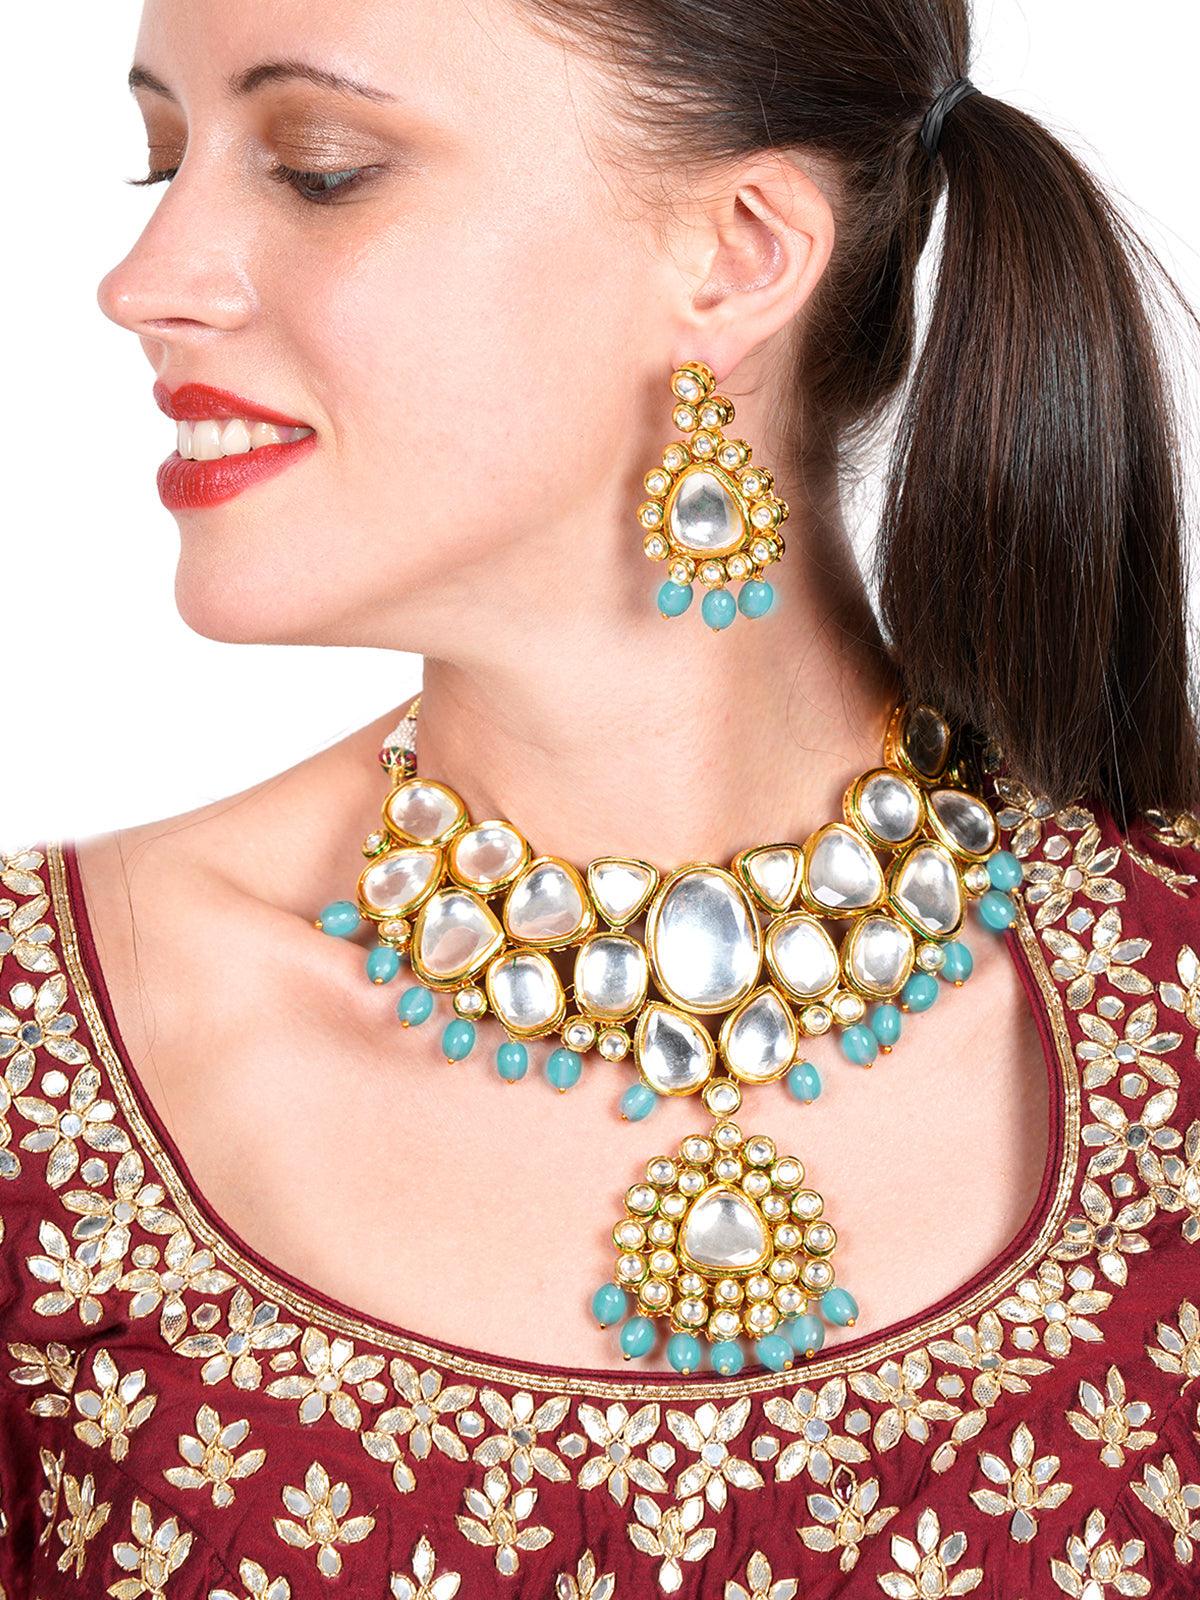 Authentic heavy semiprecious blue kundan & enameled necklace with earrings! - Odette